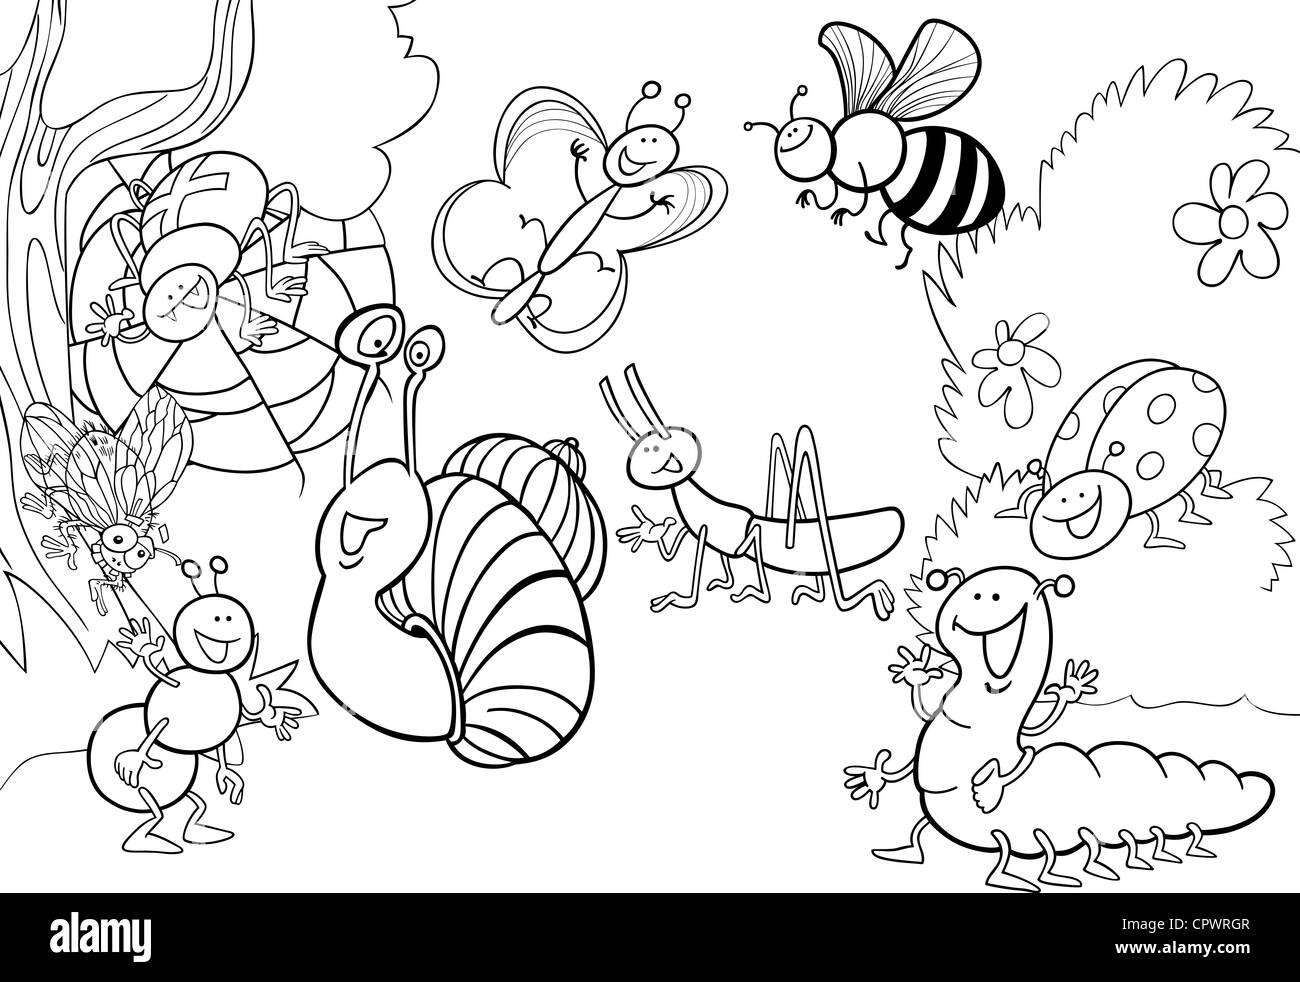 cartoon illustration of funny insects on the meadow for coloring book Stock Photo